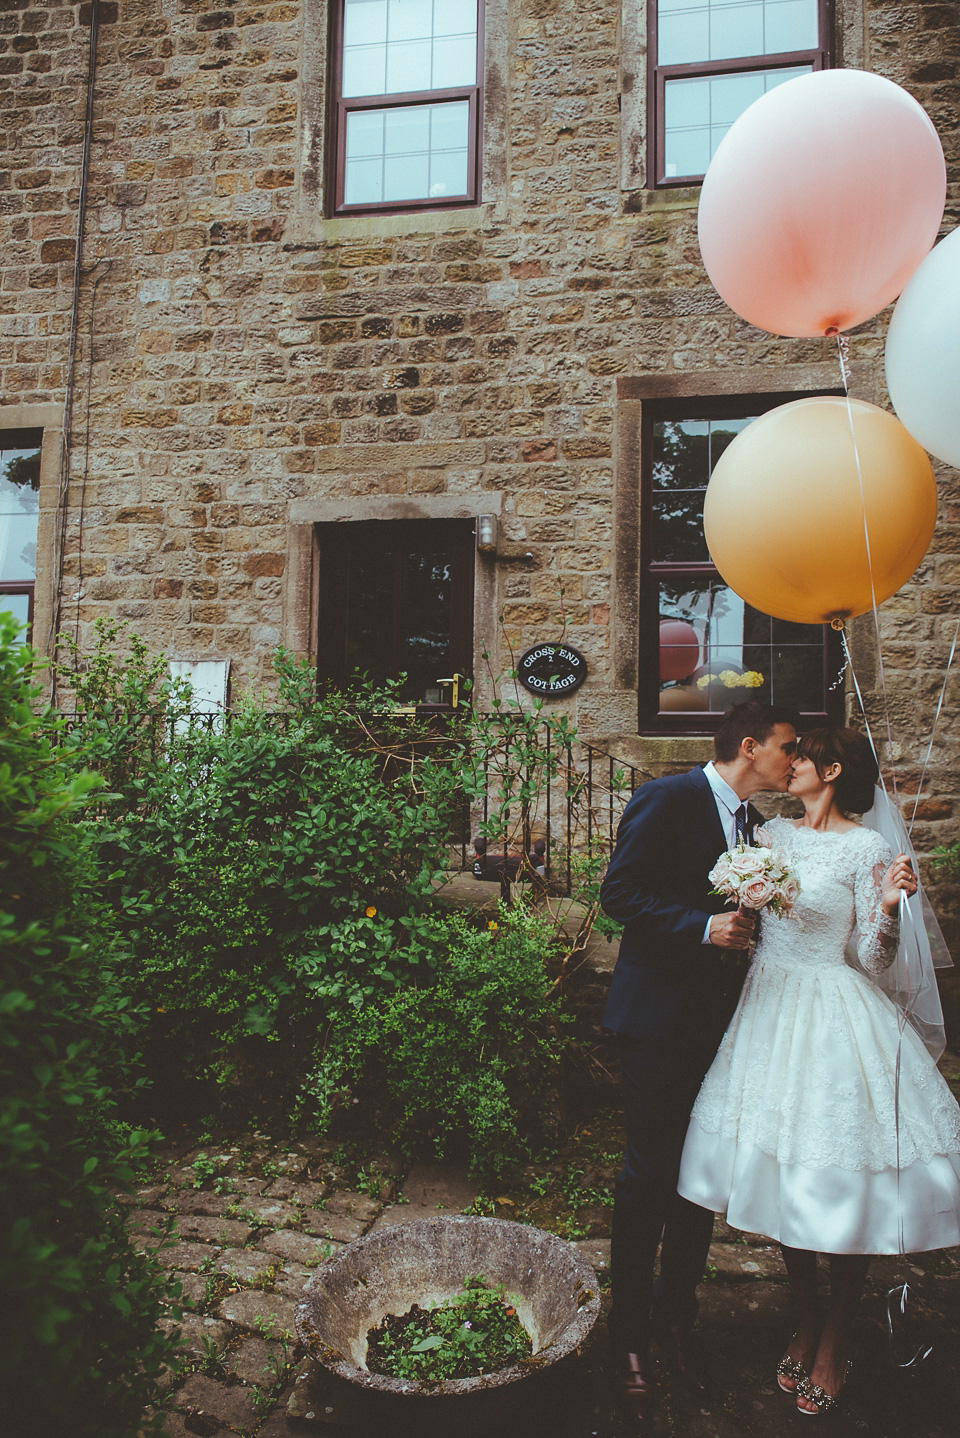 The bride wears a 1950's inspired lace dress for her village hall wedding in Yorkshire. Photography by Shutter Go Click.